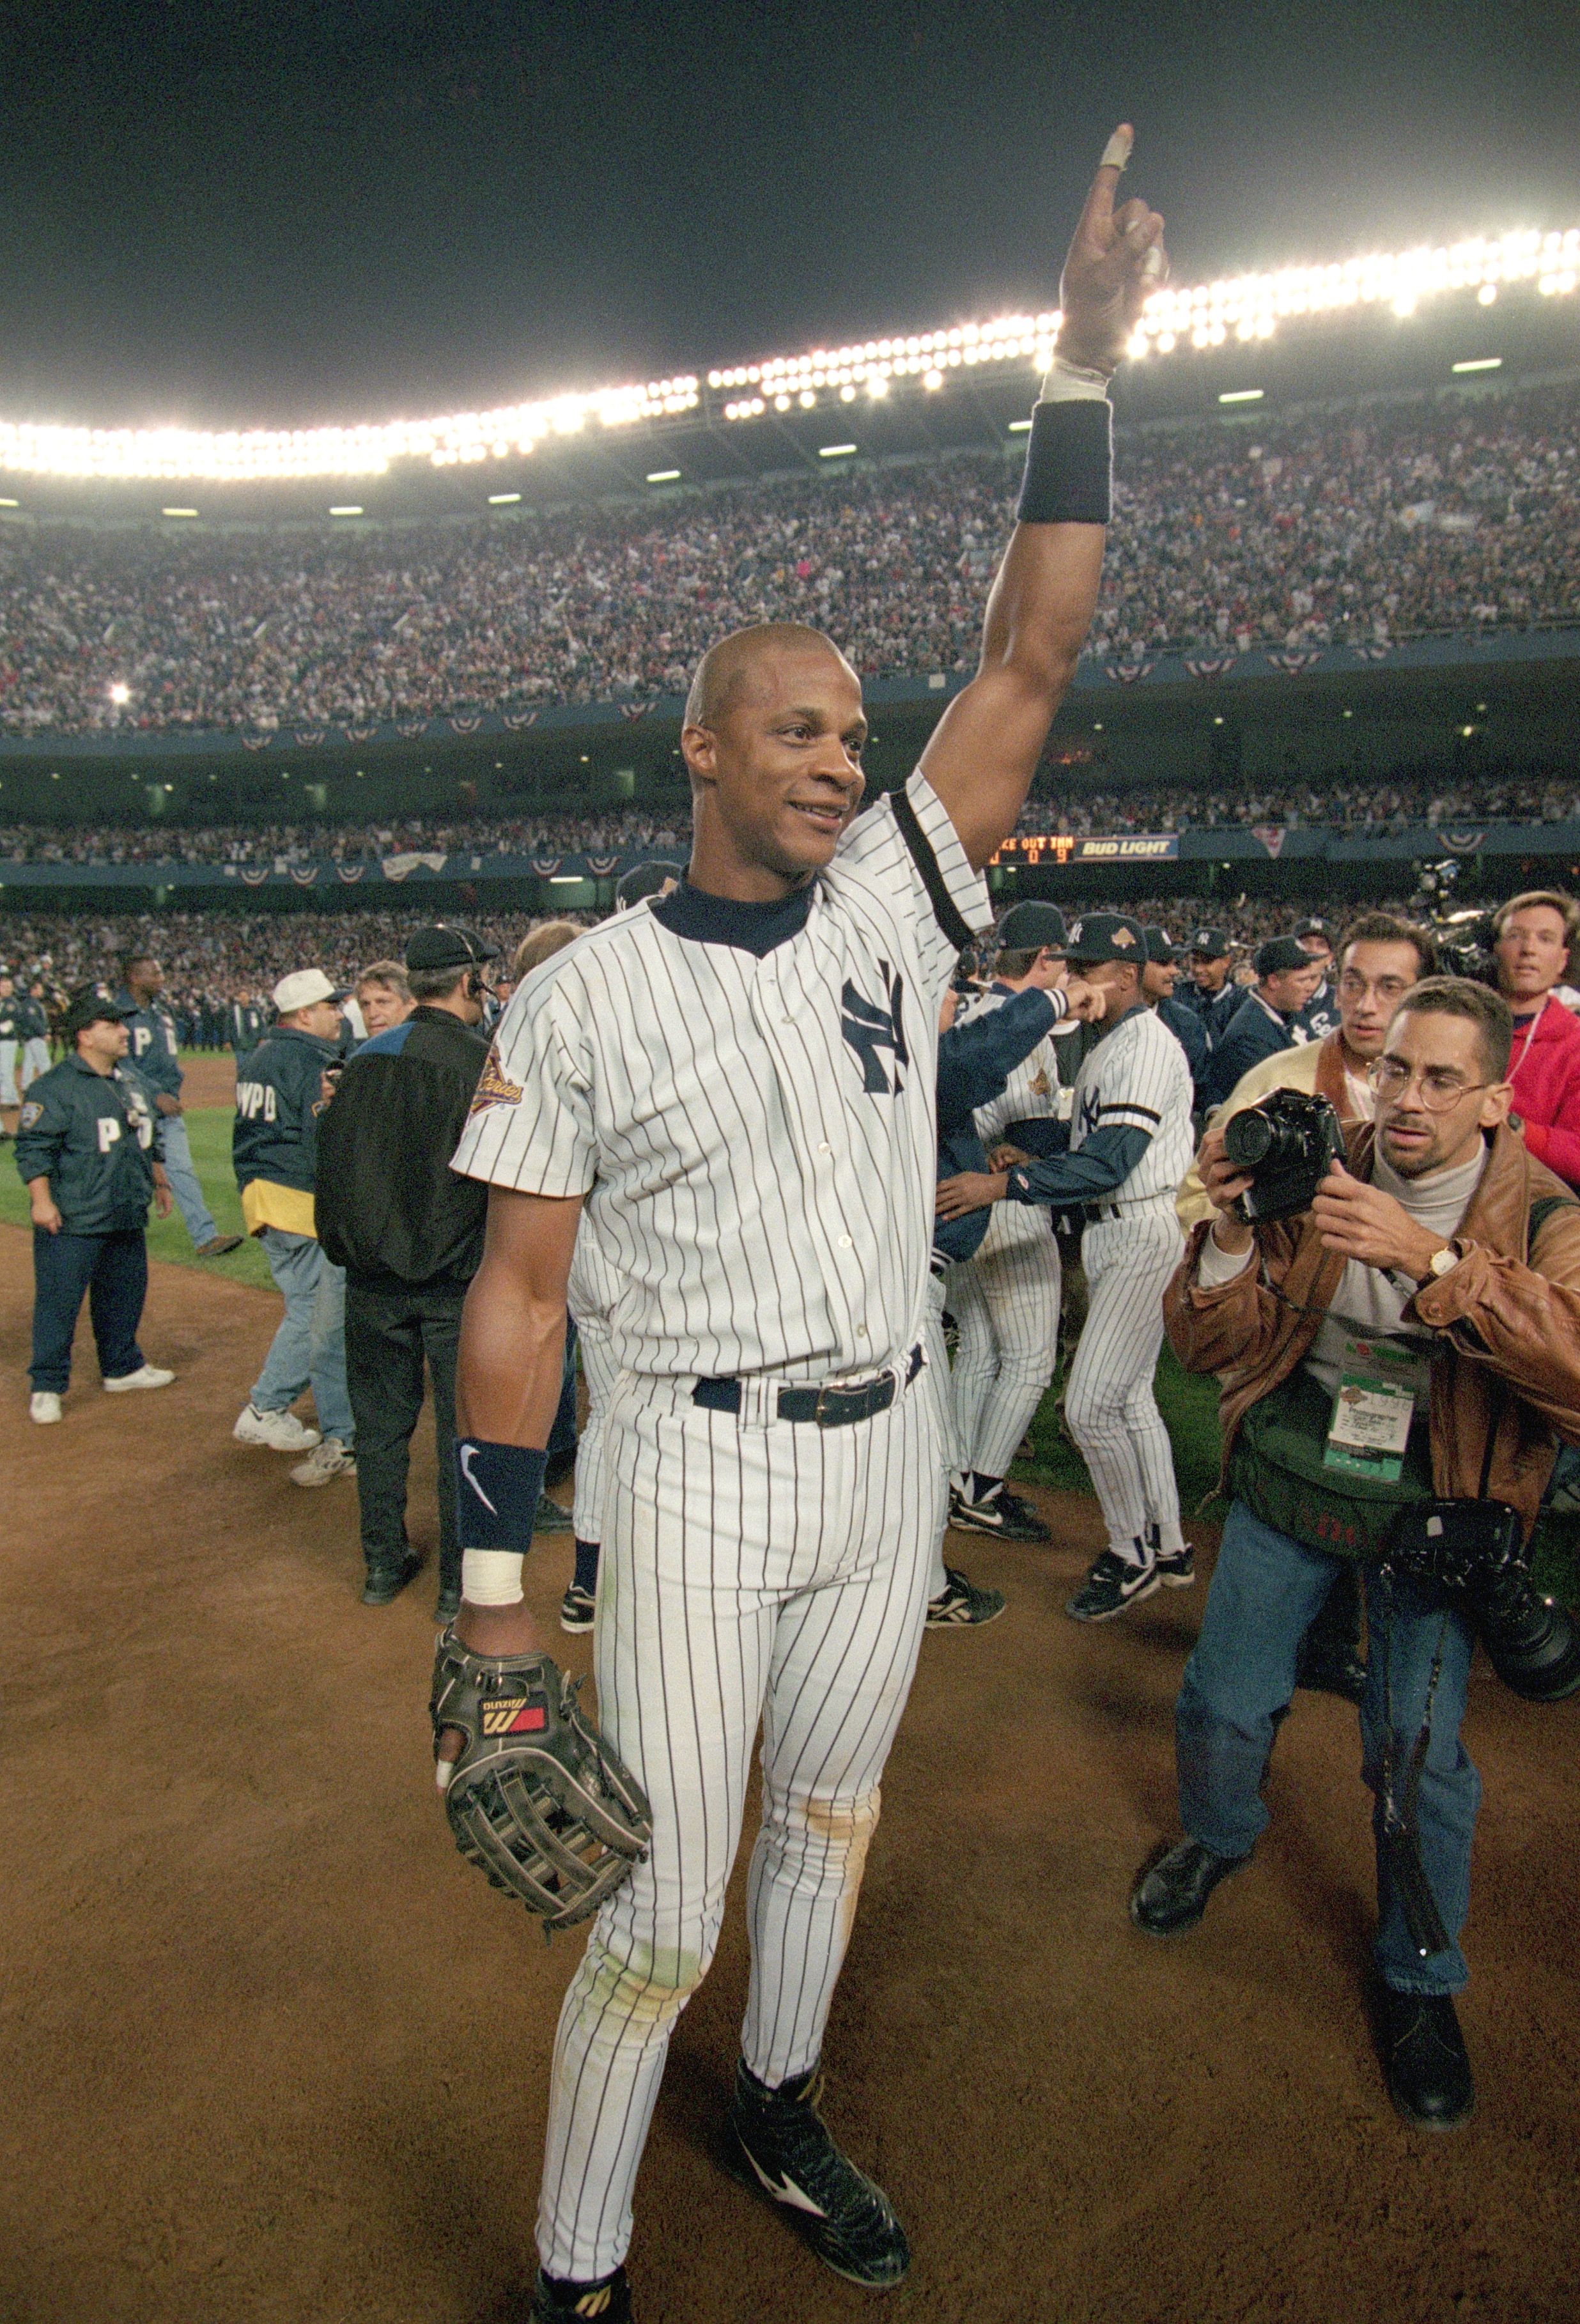 Sorry Darryl Strawberry, but Paul O'Neill and 1998 Yankees are